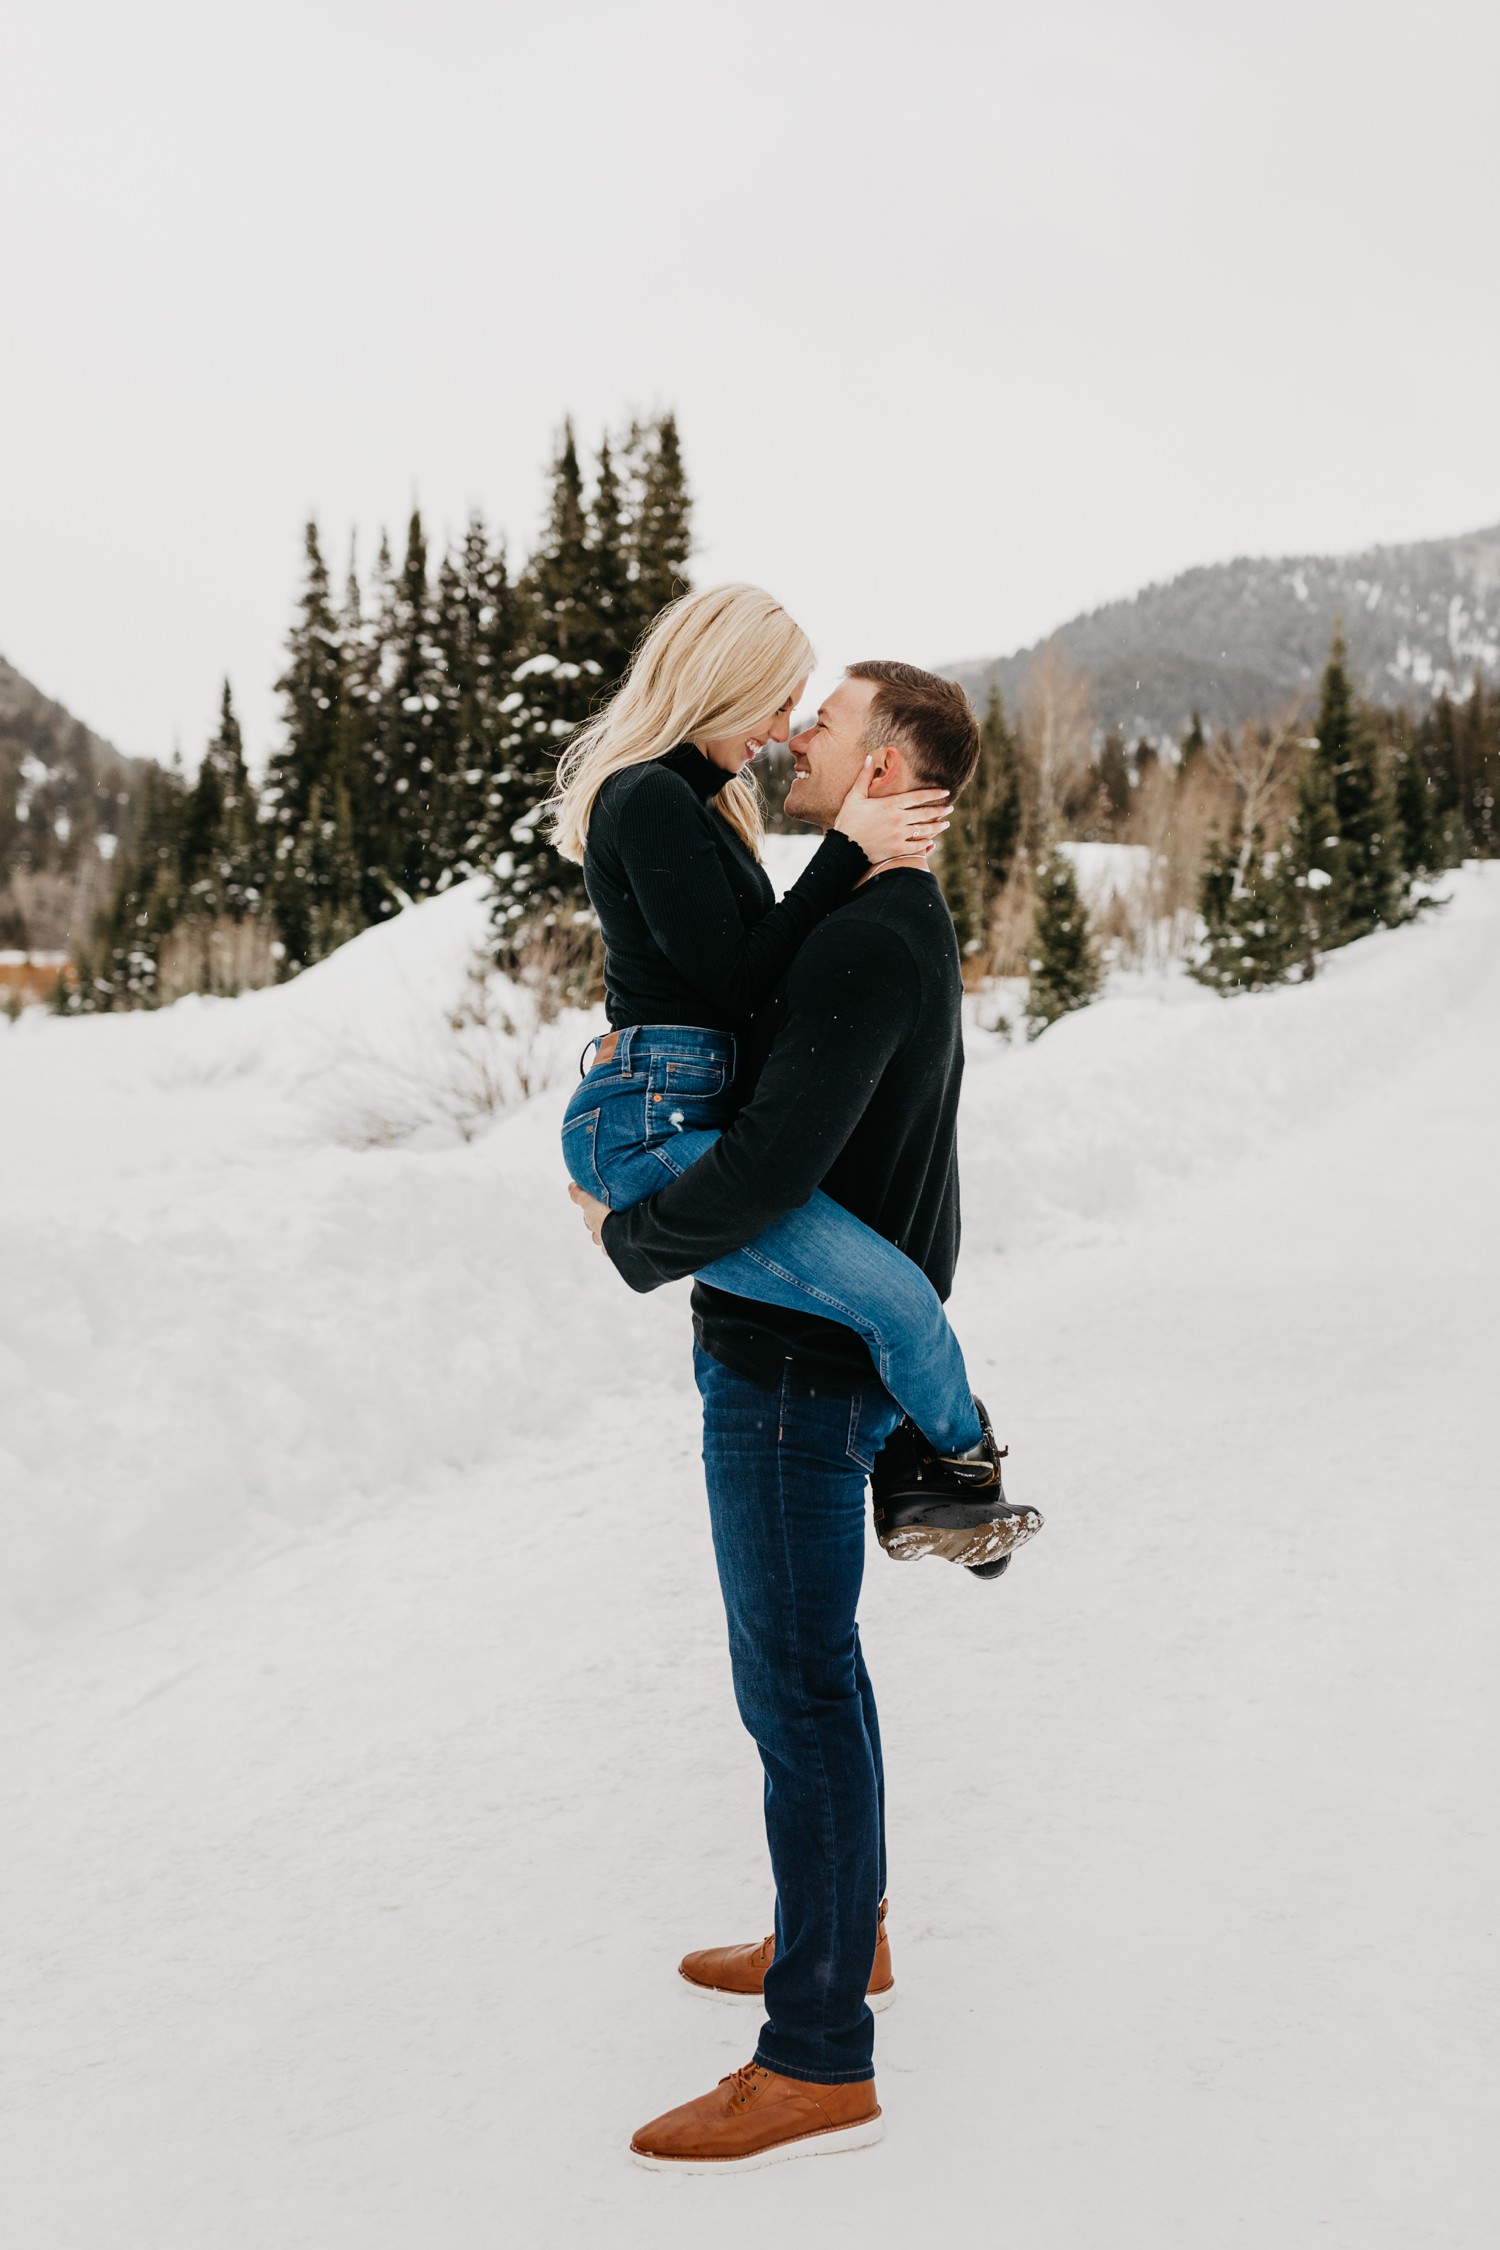 Salt Lake City Engagement Photos in the snow